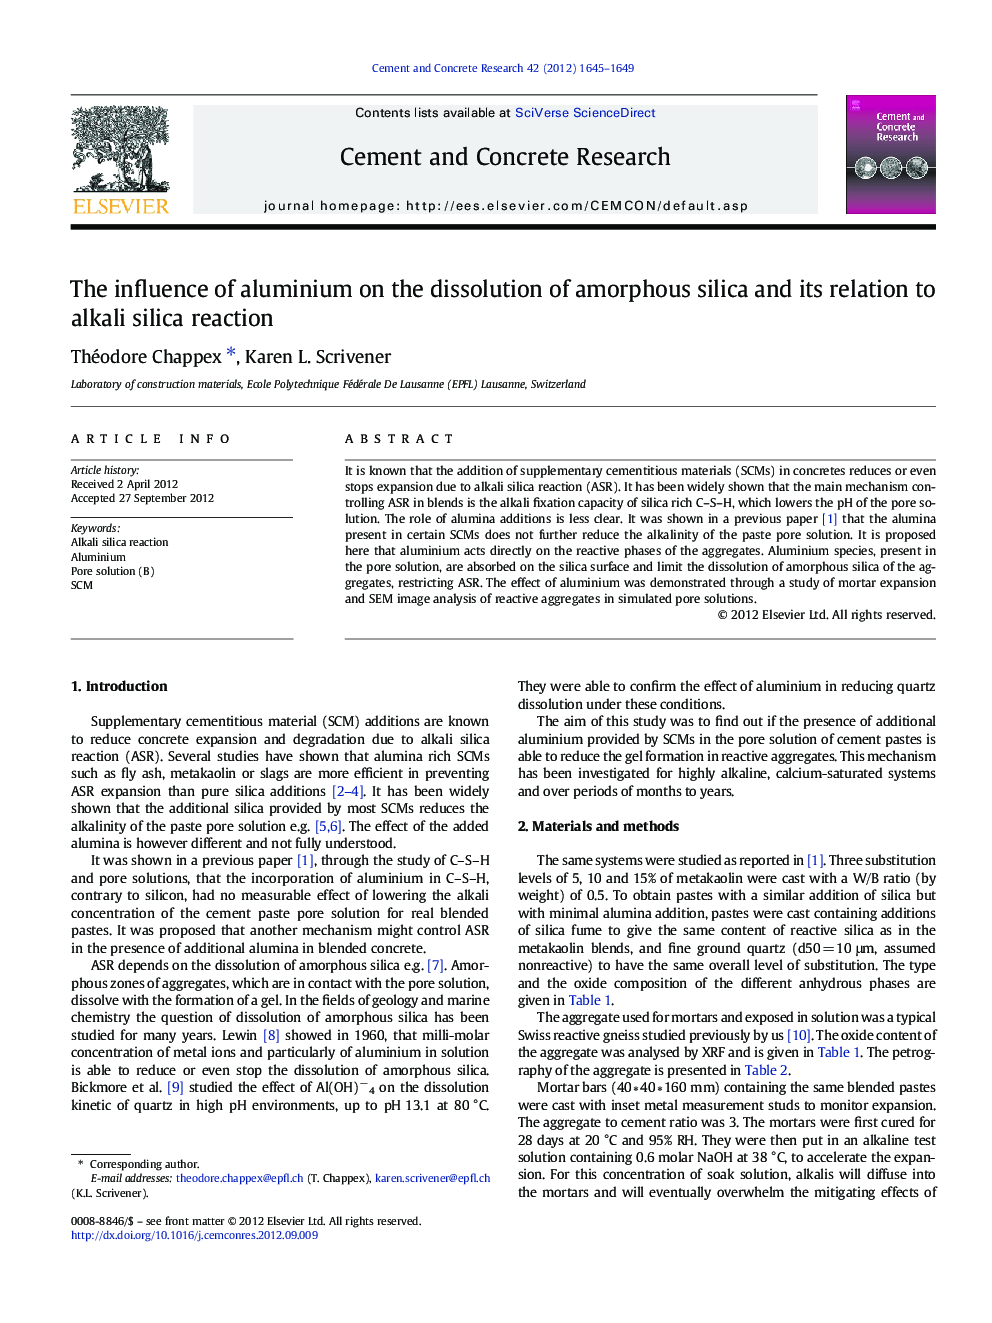 The influence of aluminium on the dissolution of amorphous silica and its relation to alkali silica reaction